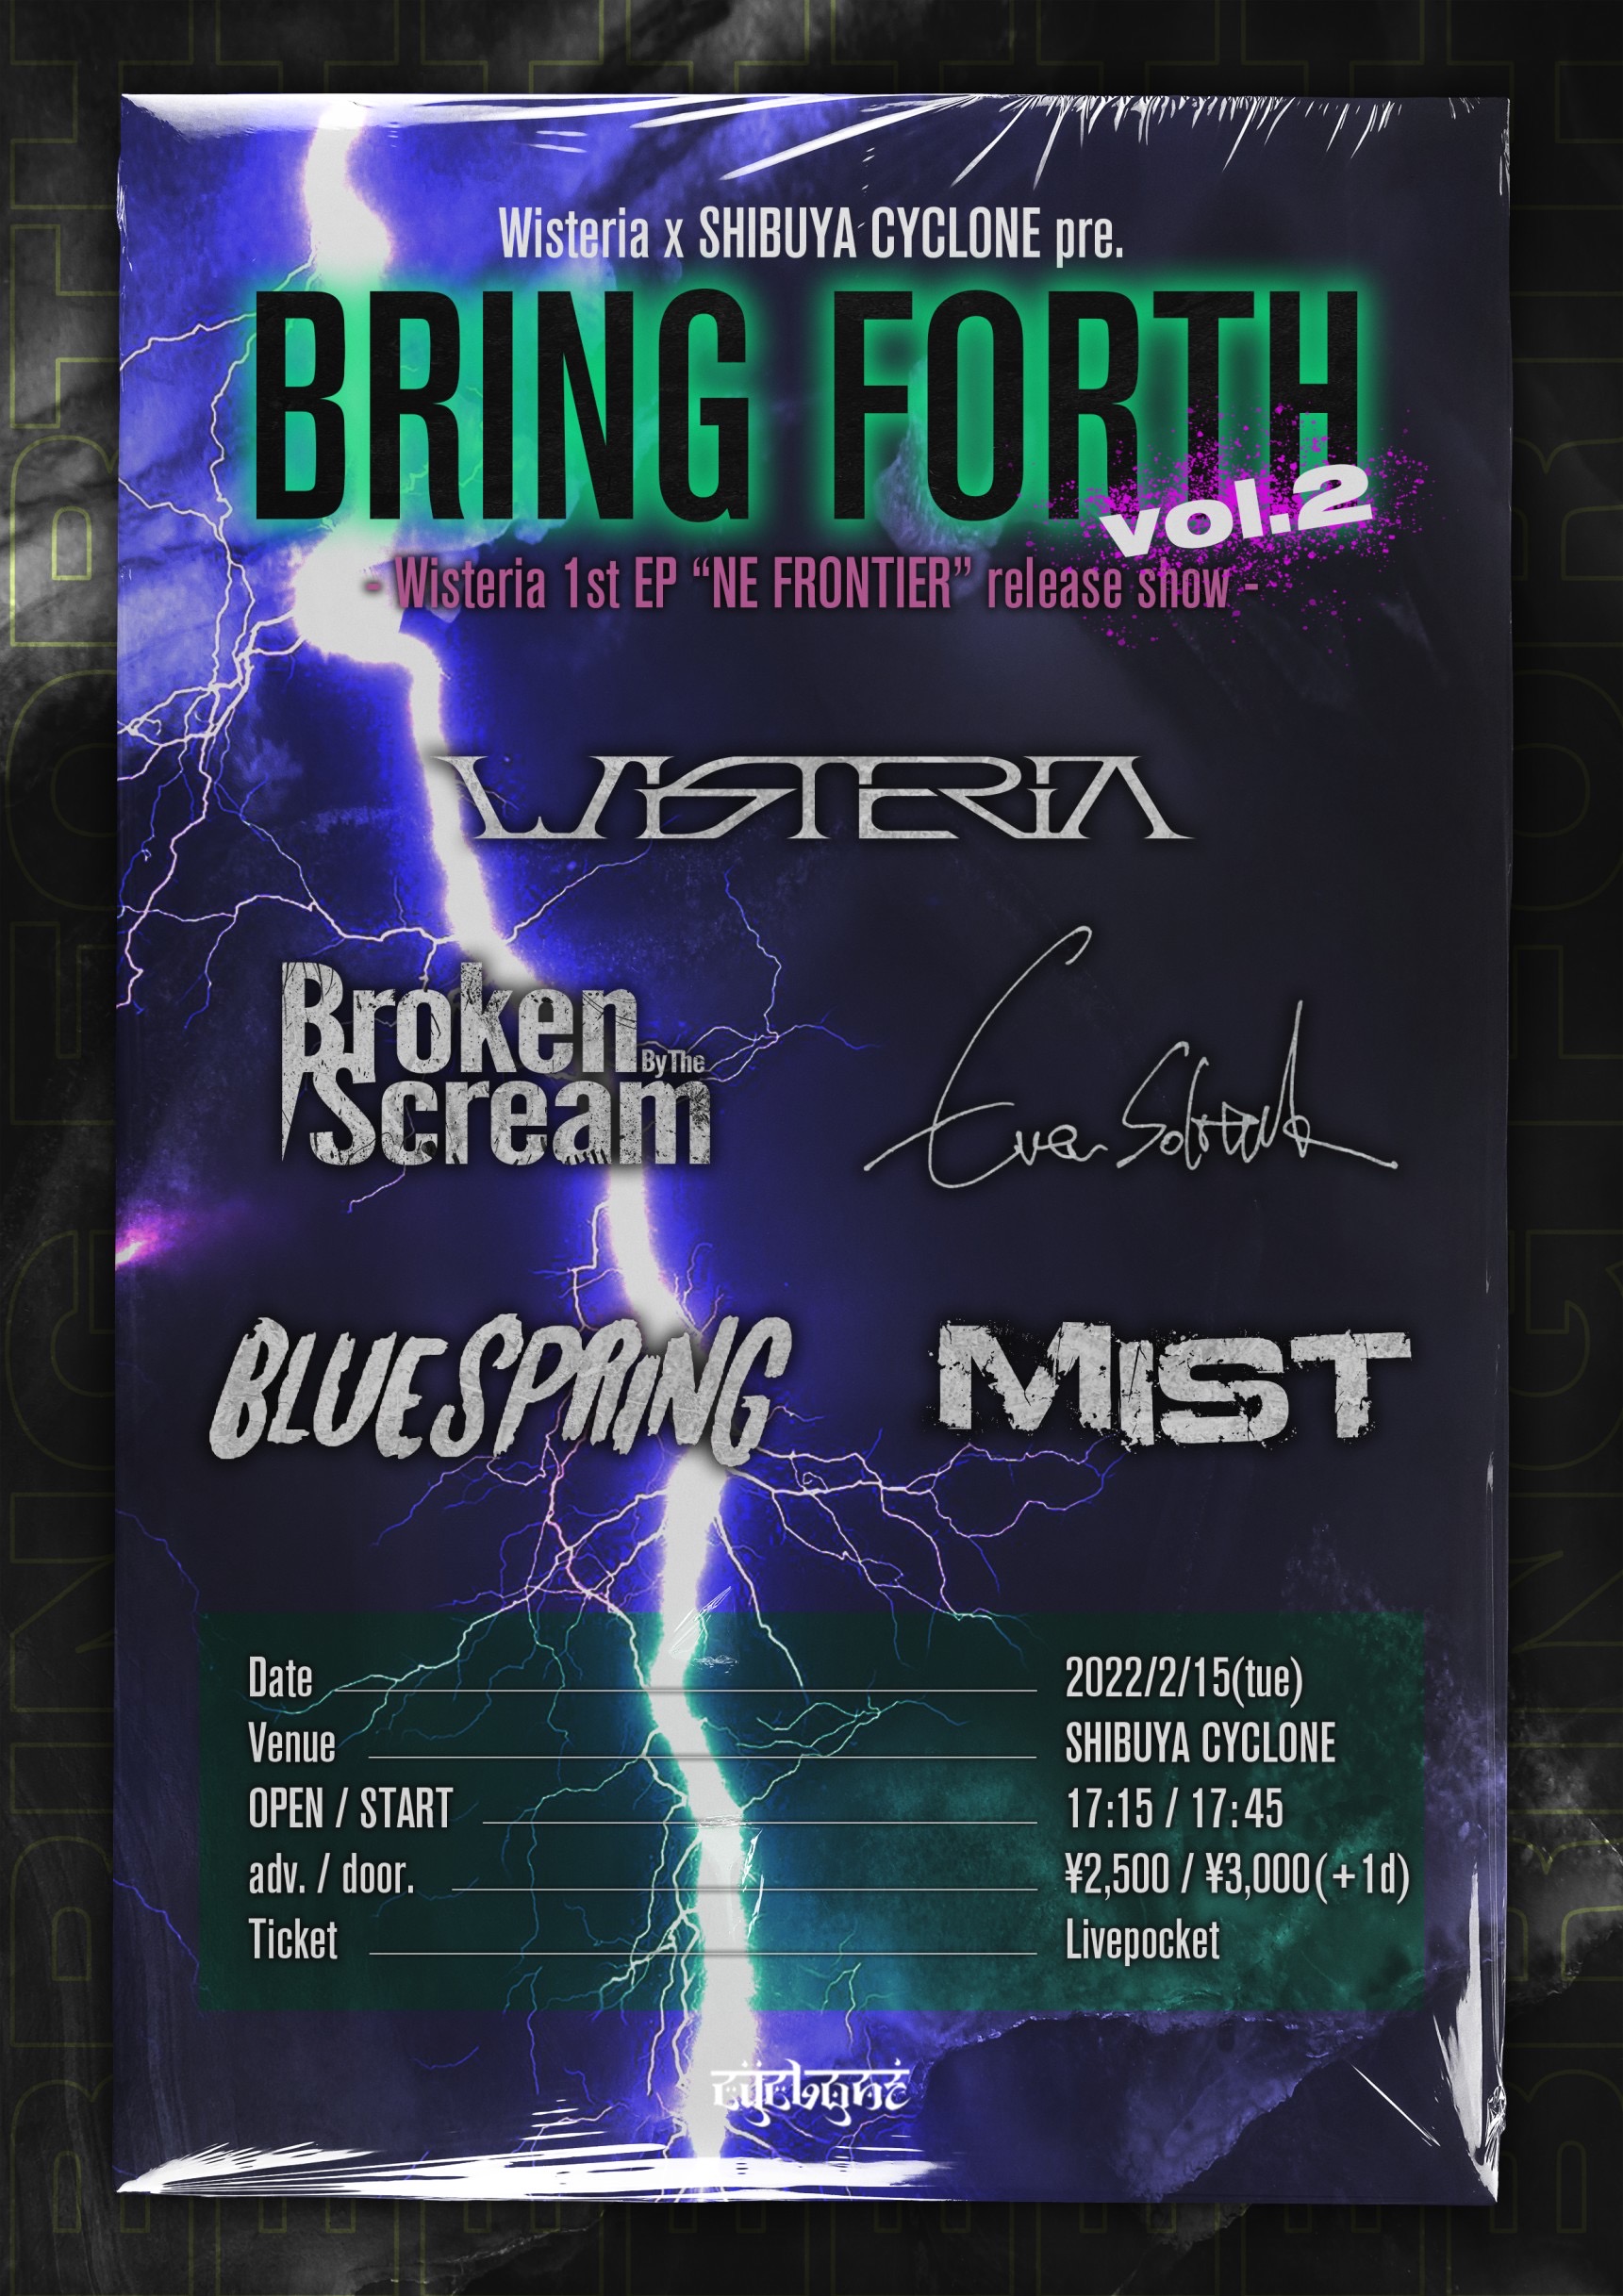 『BRING FORTH vol.2』 Wisteria 1st EP '' NEW FRONTIER '' release show